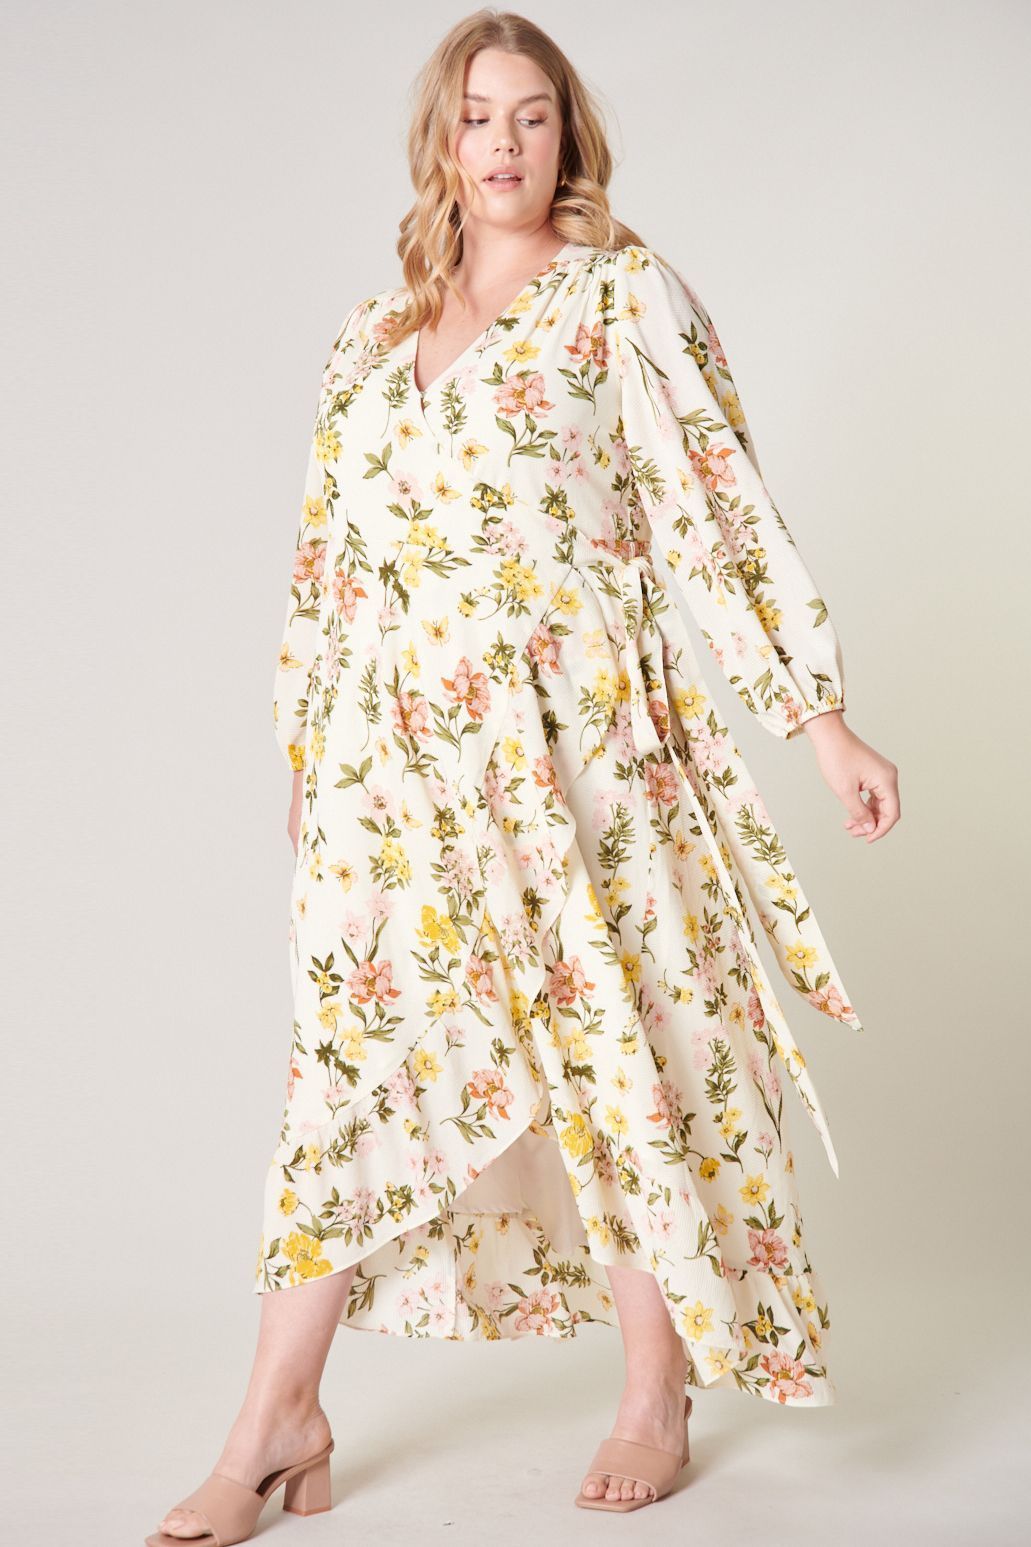 Plus Size Model wearing the Ashlynn Floral Califa Maxi Wrap Dress by SUGARLIPS, featuring a flowing high-low hemline, long sleeves, and a vibrant print of yellow and pink flowers against a light cream background, complemented by beige strappy heels